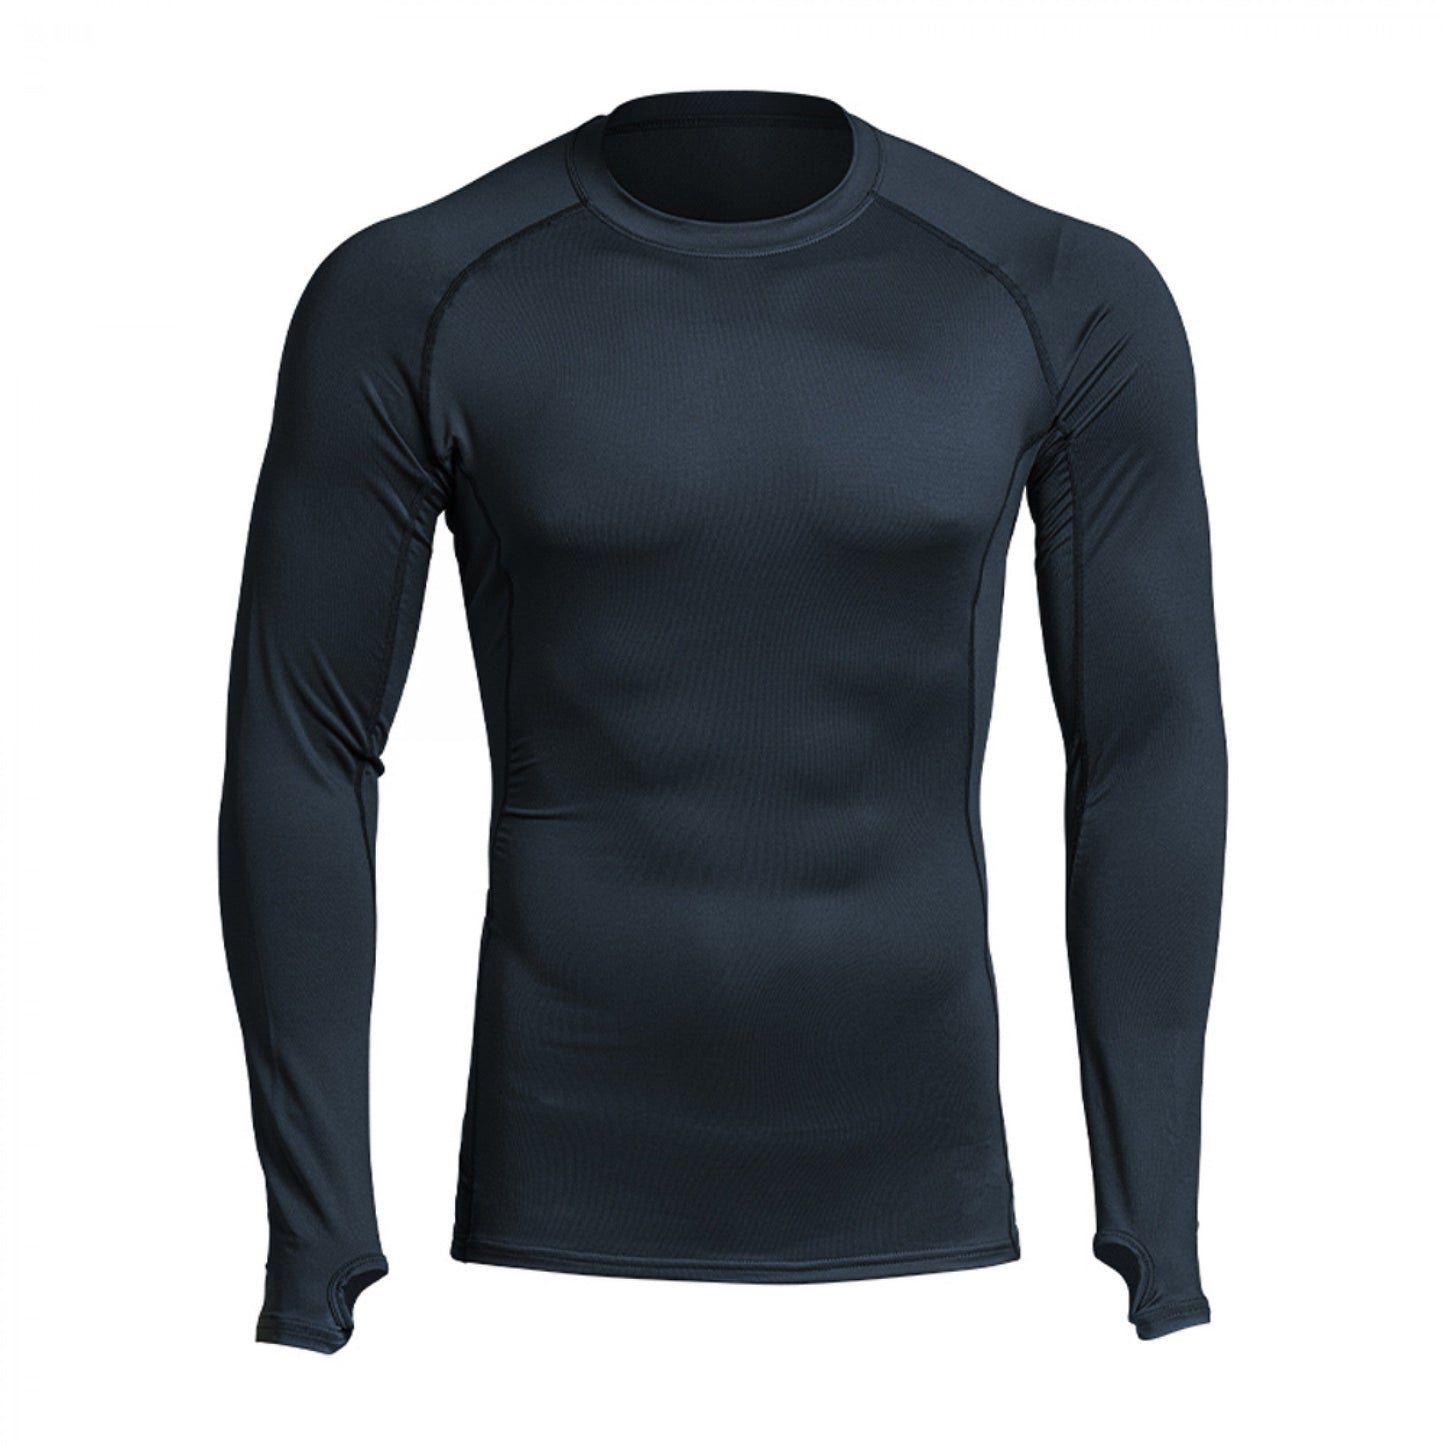 Maillot Thermo Performer 0°C > -10°C bleu marine